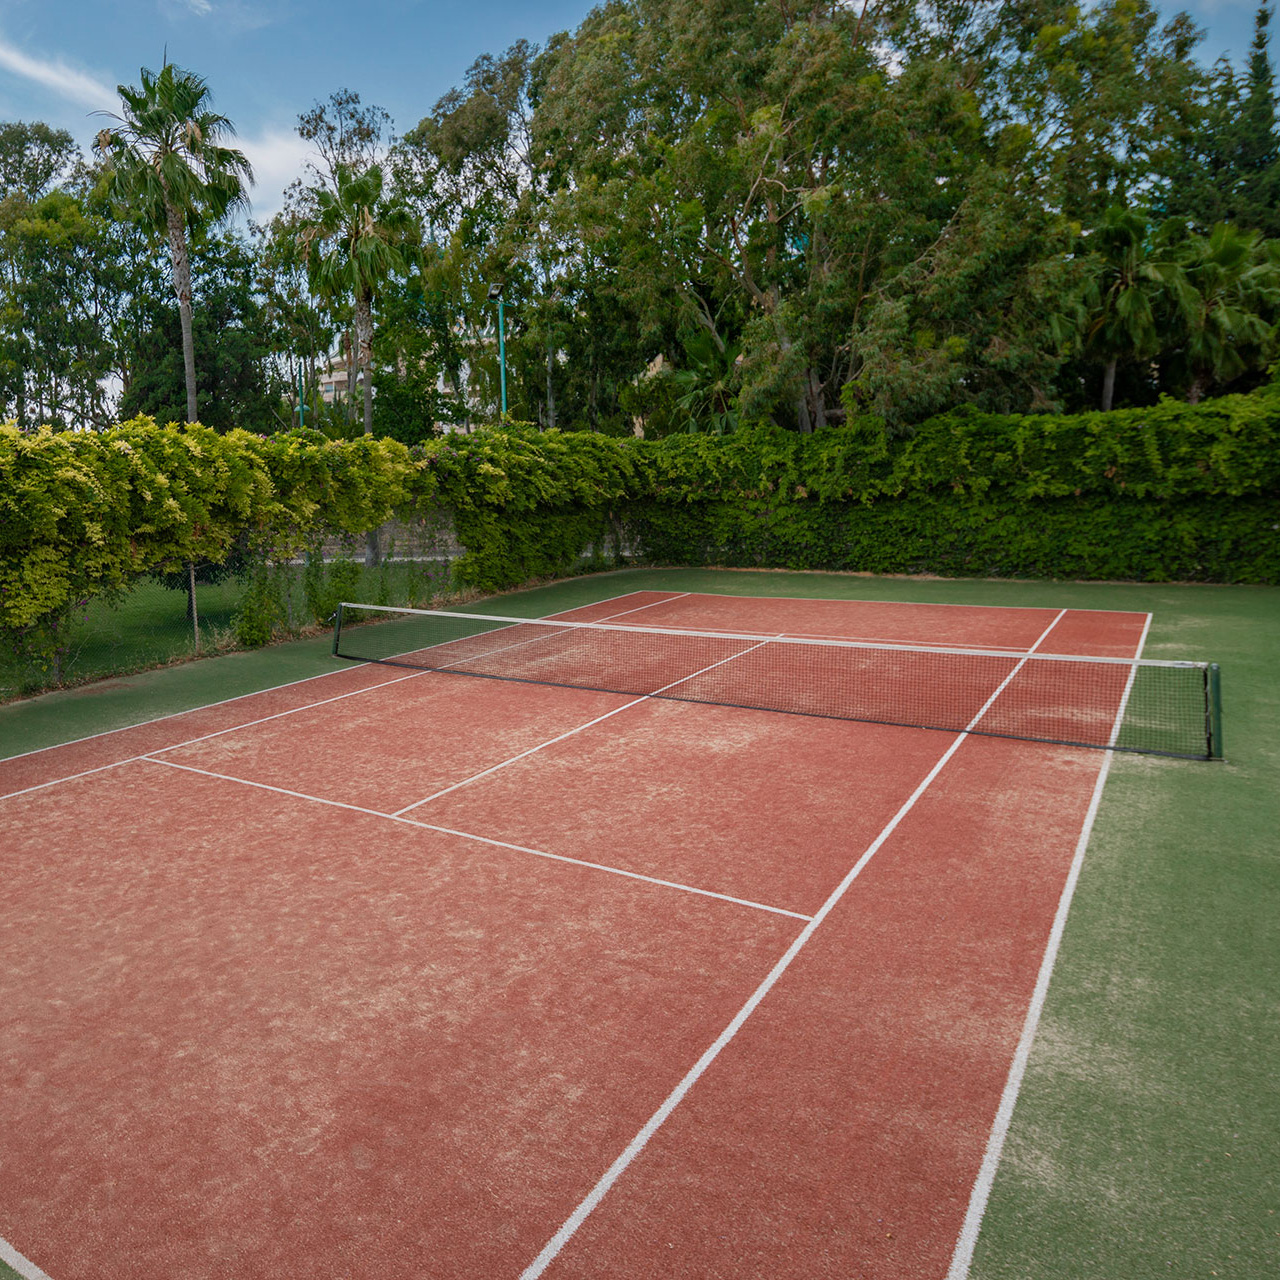 A fantastic option for tennis enthusiasts